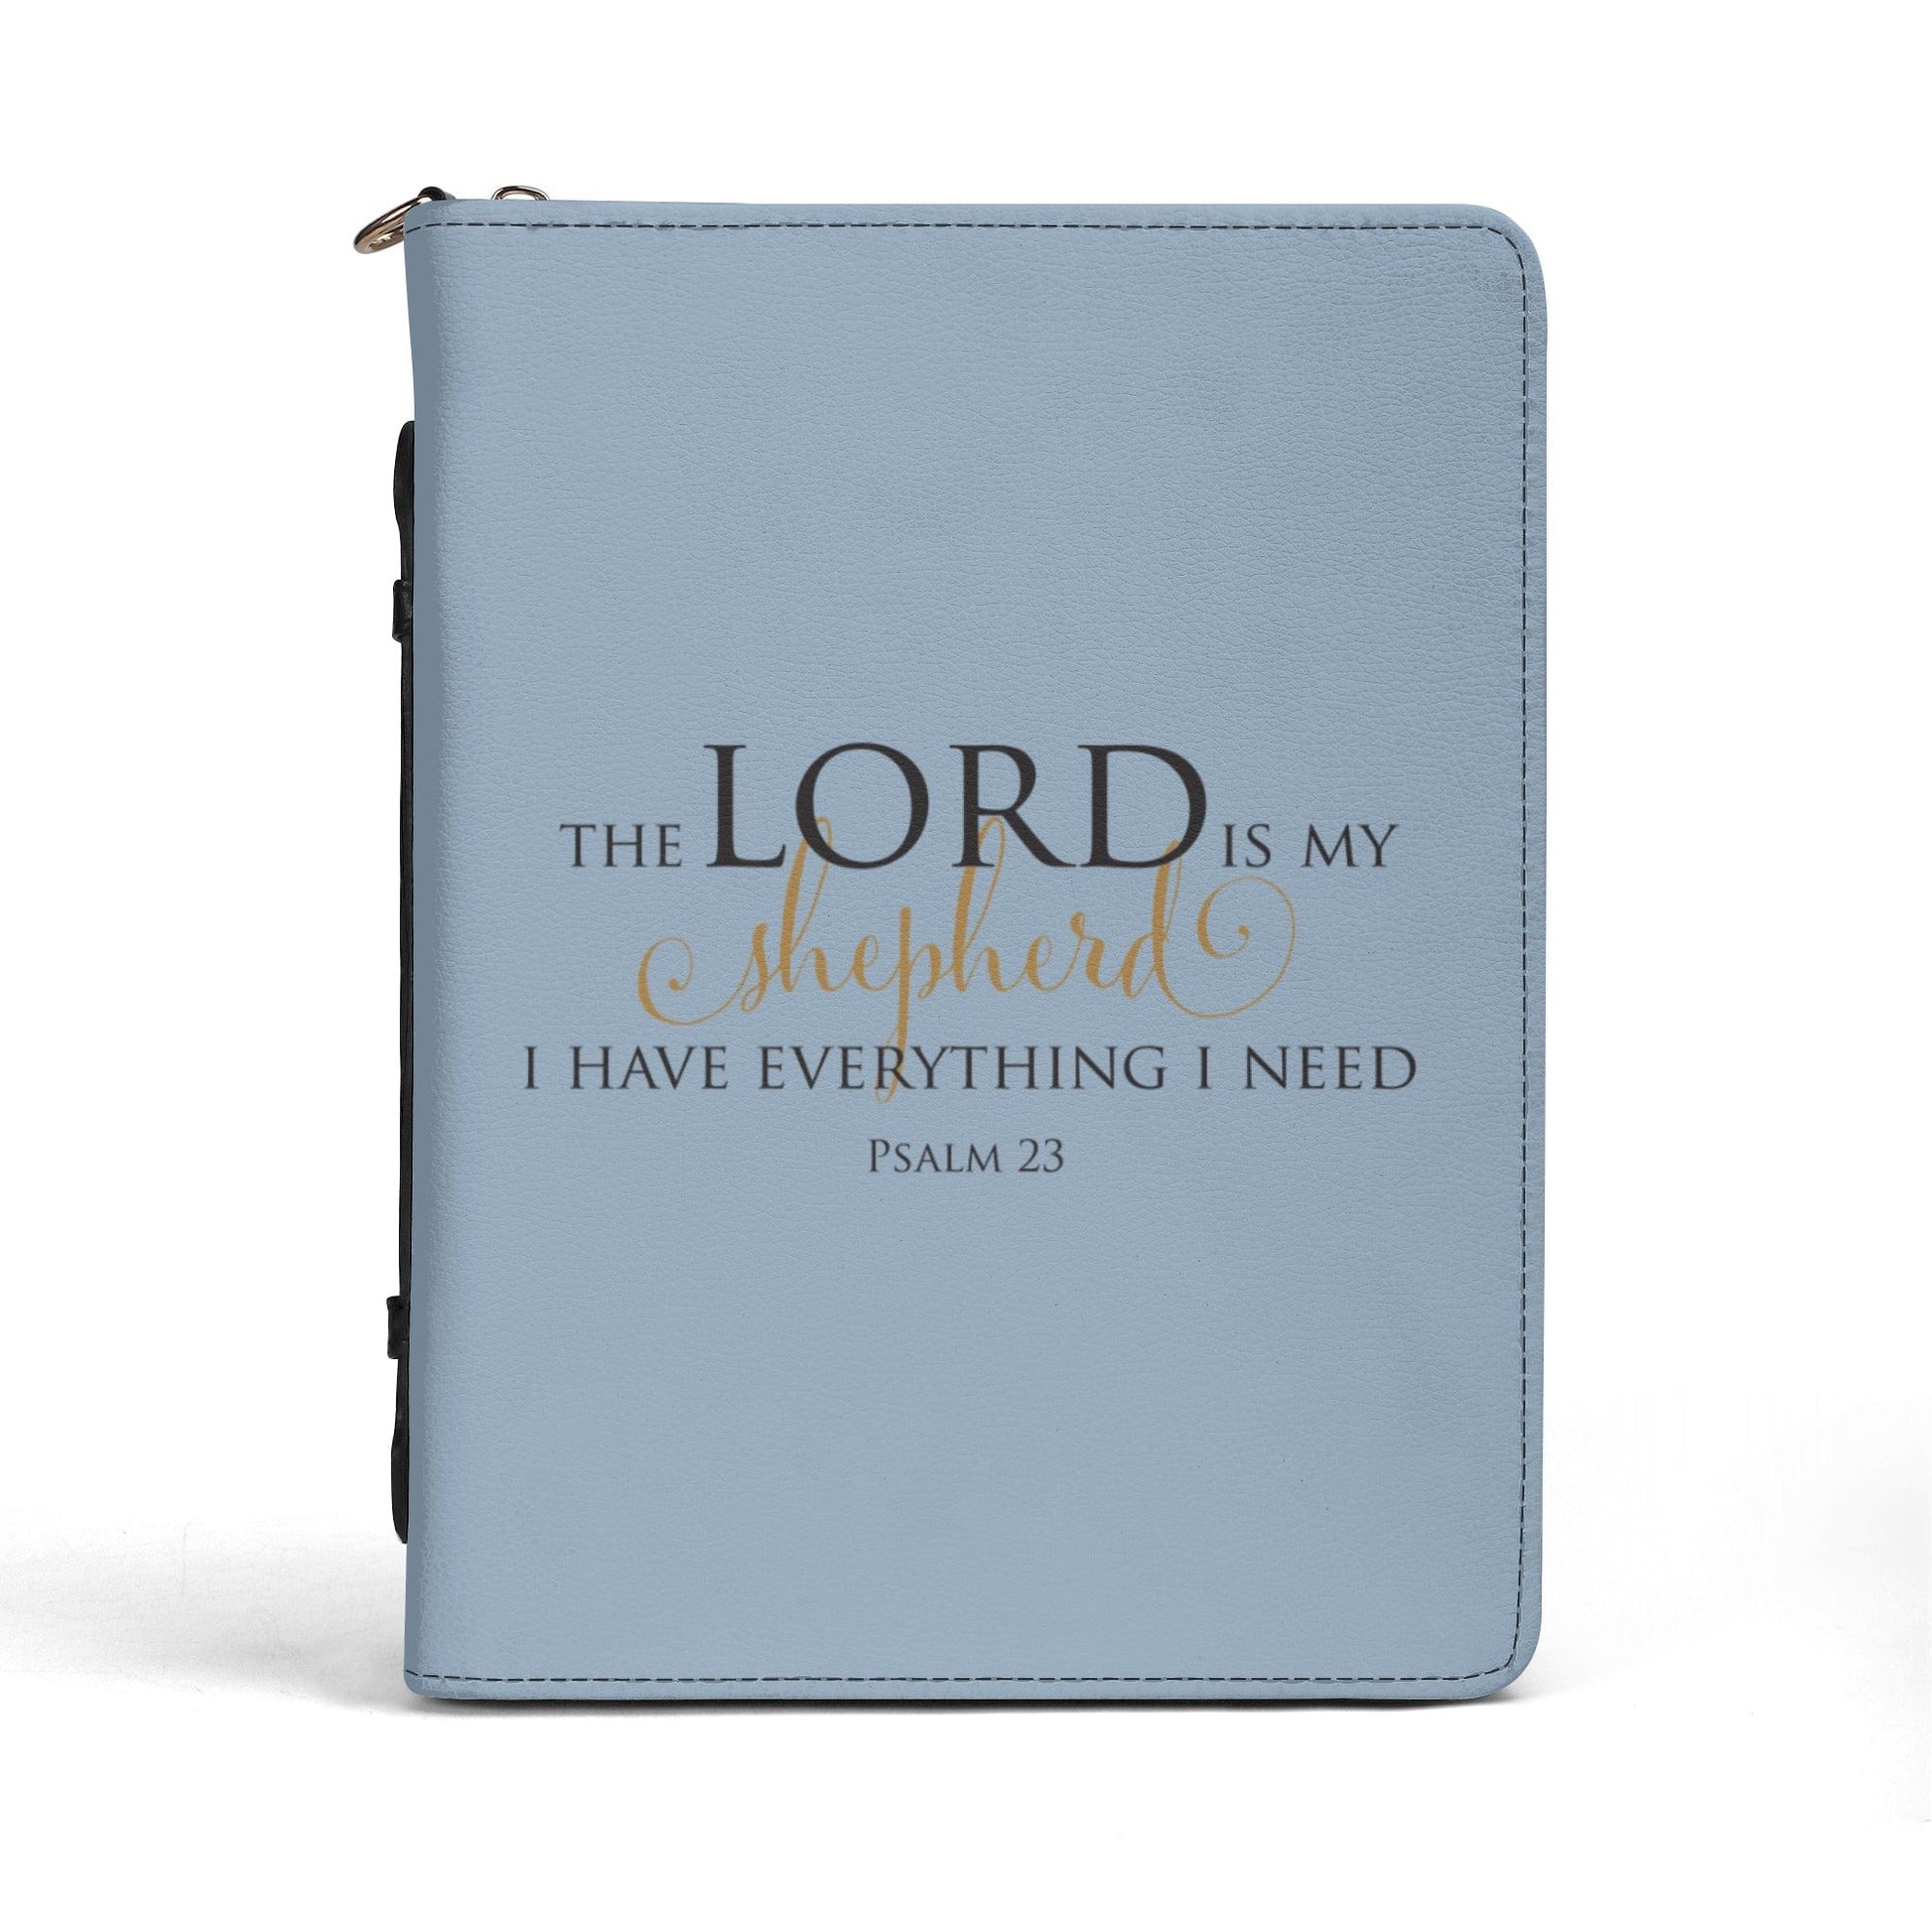 Lord Is My Shepherd PU Leather Bible Book Cover with Pocket  POP Customs M (9.4x6.7x1.6) 1 